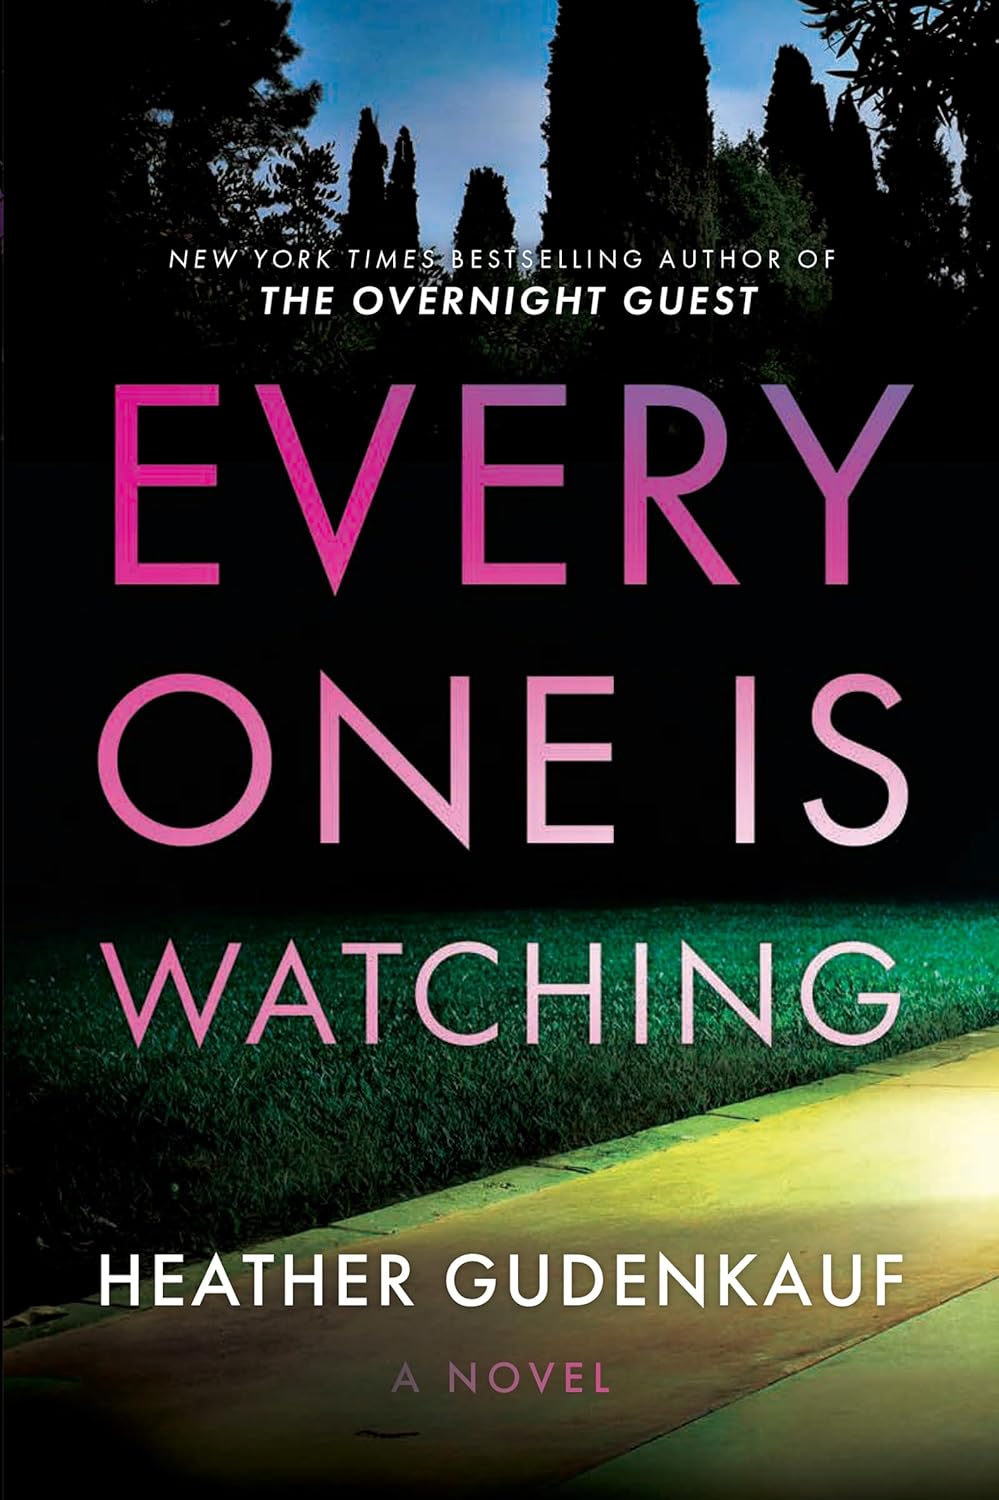 Image for "Everyone Is Watching"